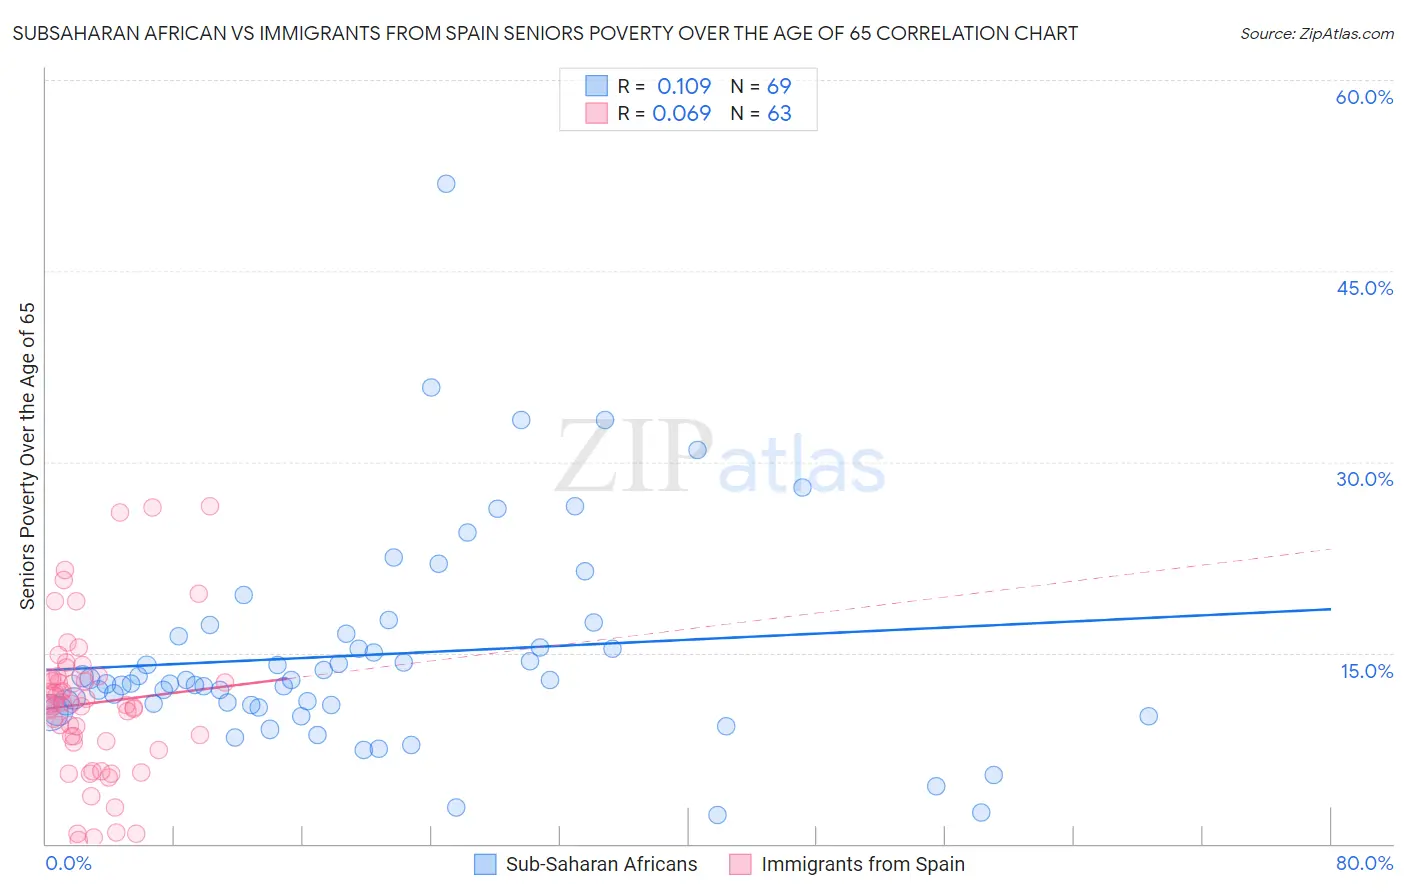 Subsaharan African vs Immigrants from Spain Seniors Poverty Over the Age of 65